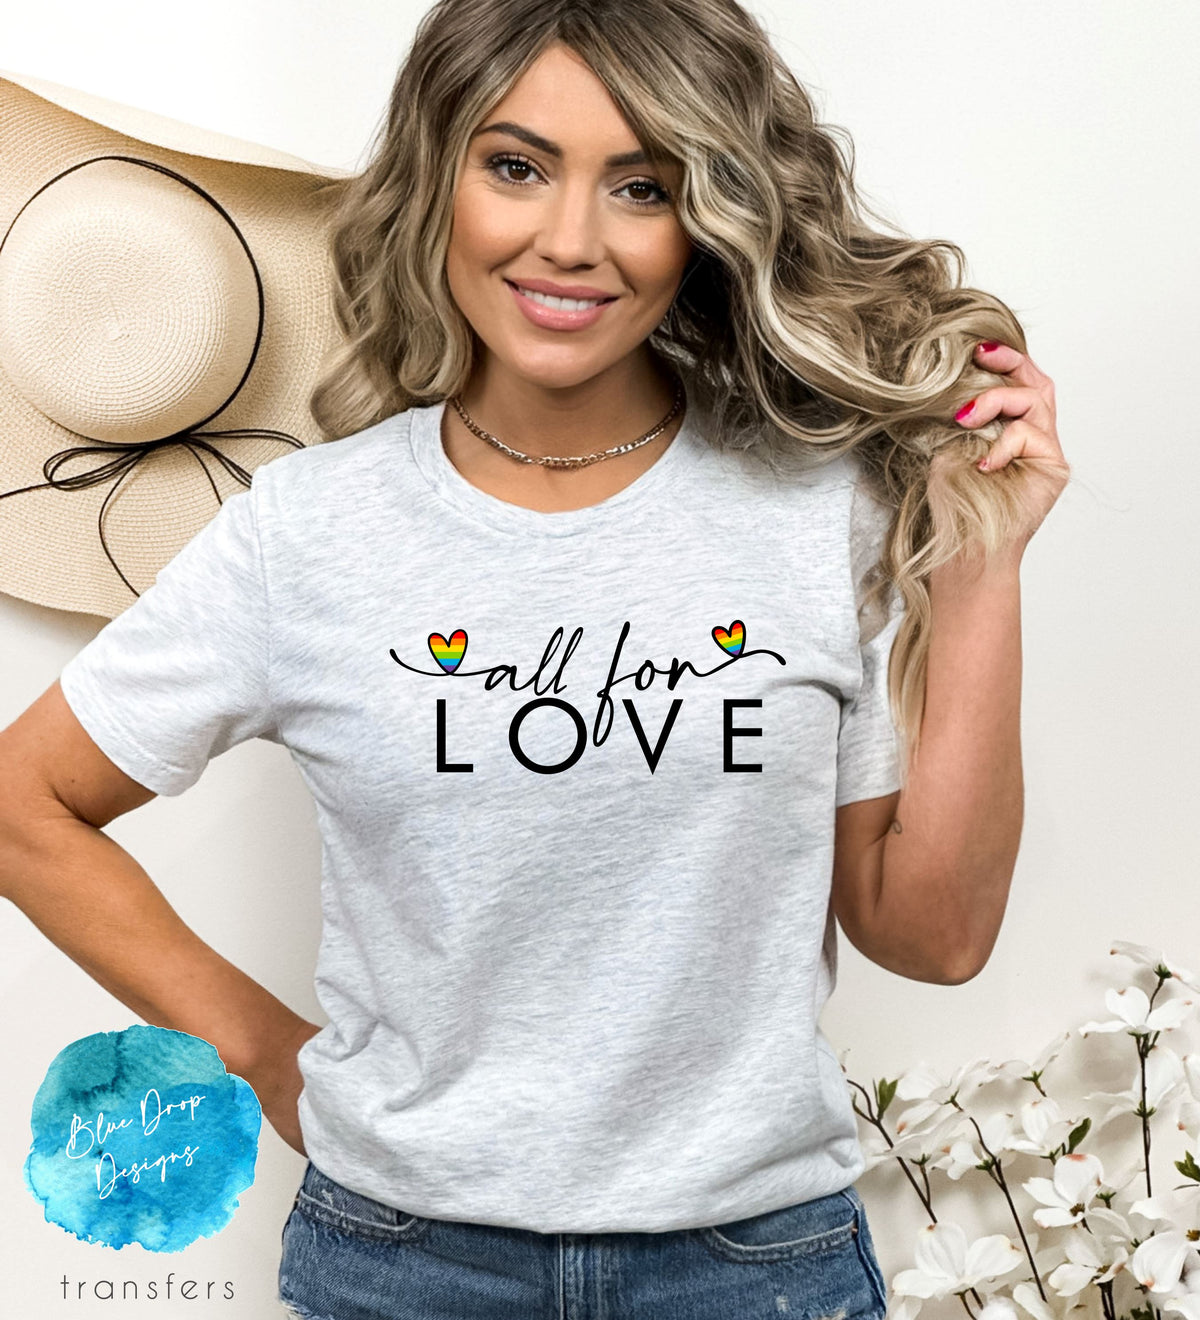 All For Love Full Colour Transfer Direct to Film Colour Transfer Blue Drop Designs 